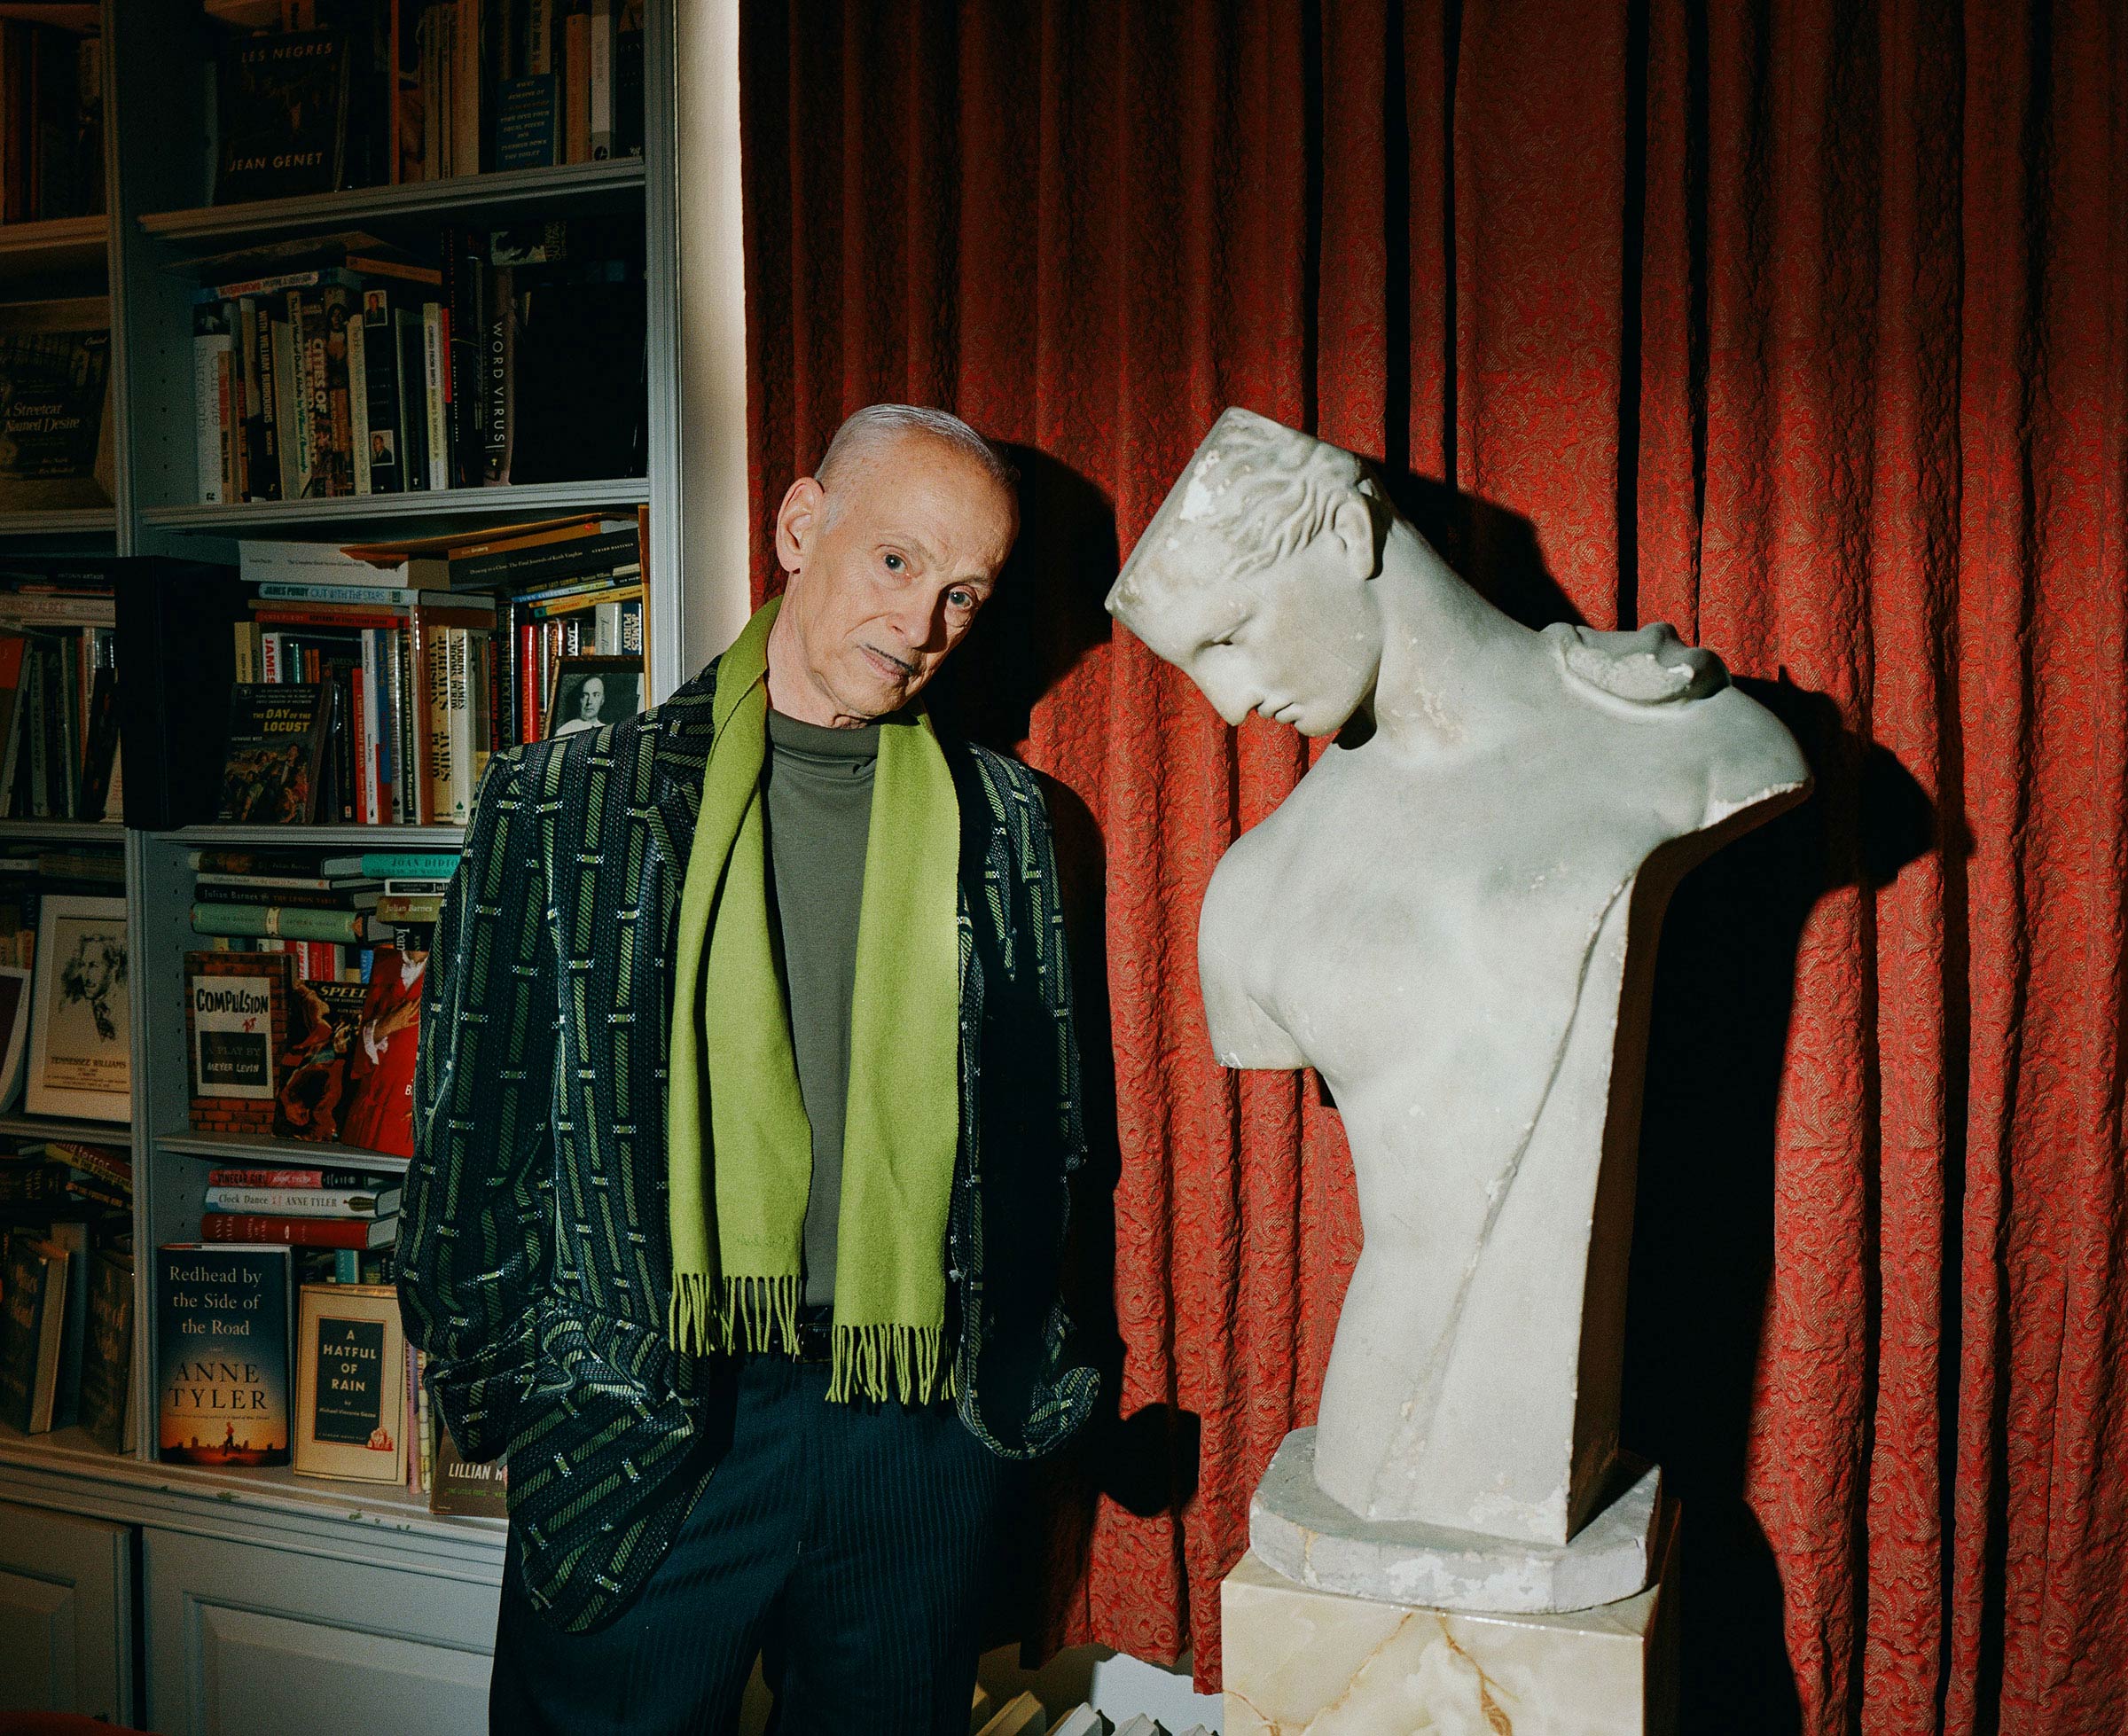 <strong>Director and writer, John Waters, in his Baltimore home.</strong> "<a href="https://time.com/6148756/john-waters-interview-maisel-2022/">America's Filth Elder John Waters Isn't Slowing Down,</a>" February 28 issue. (Peter Fisher for TIME)